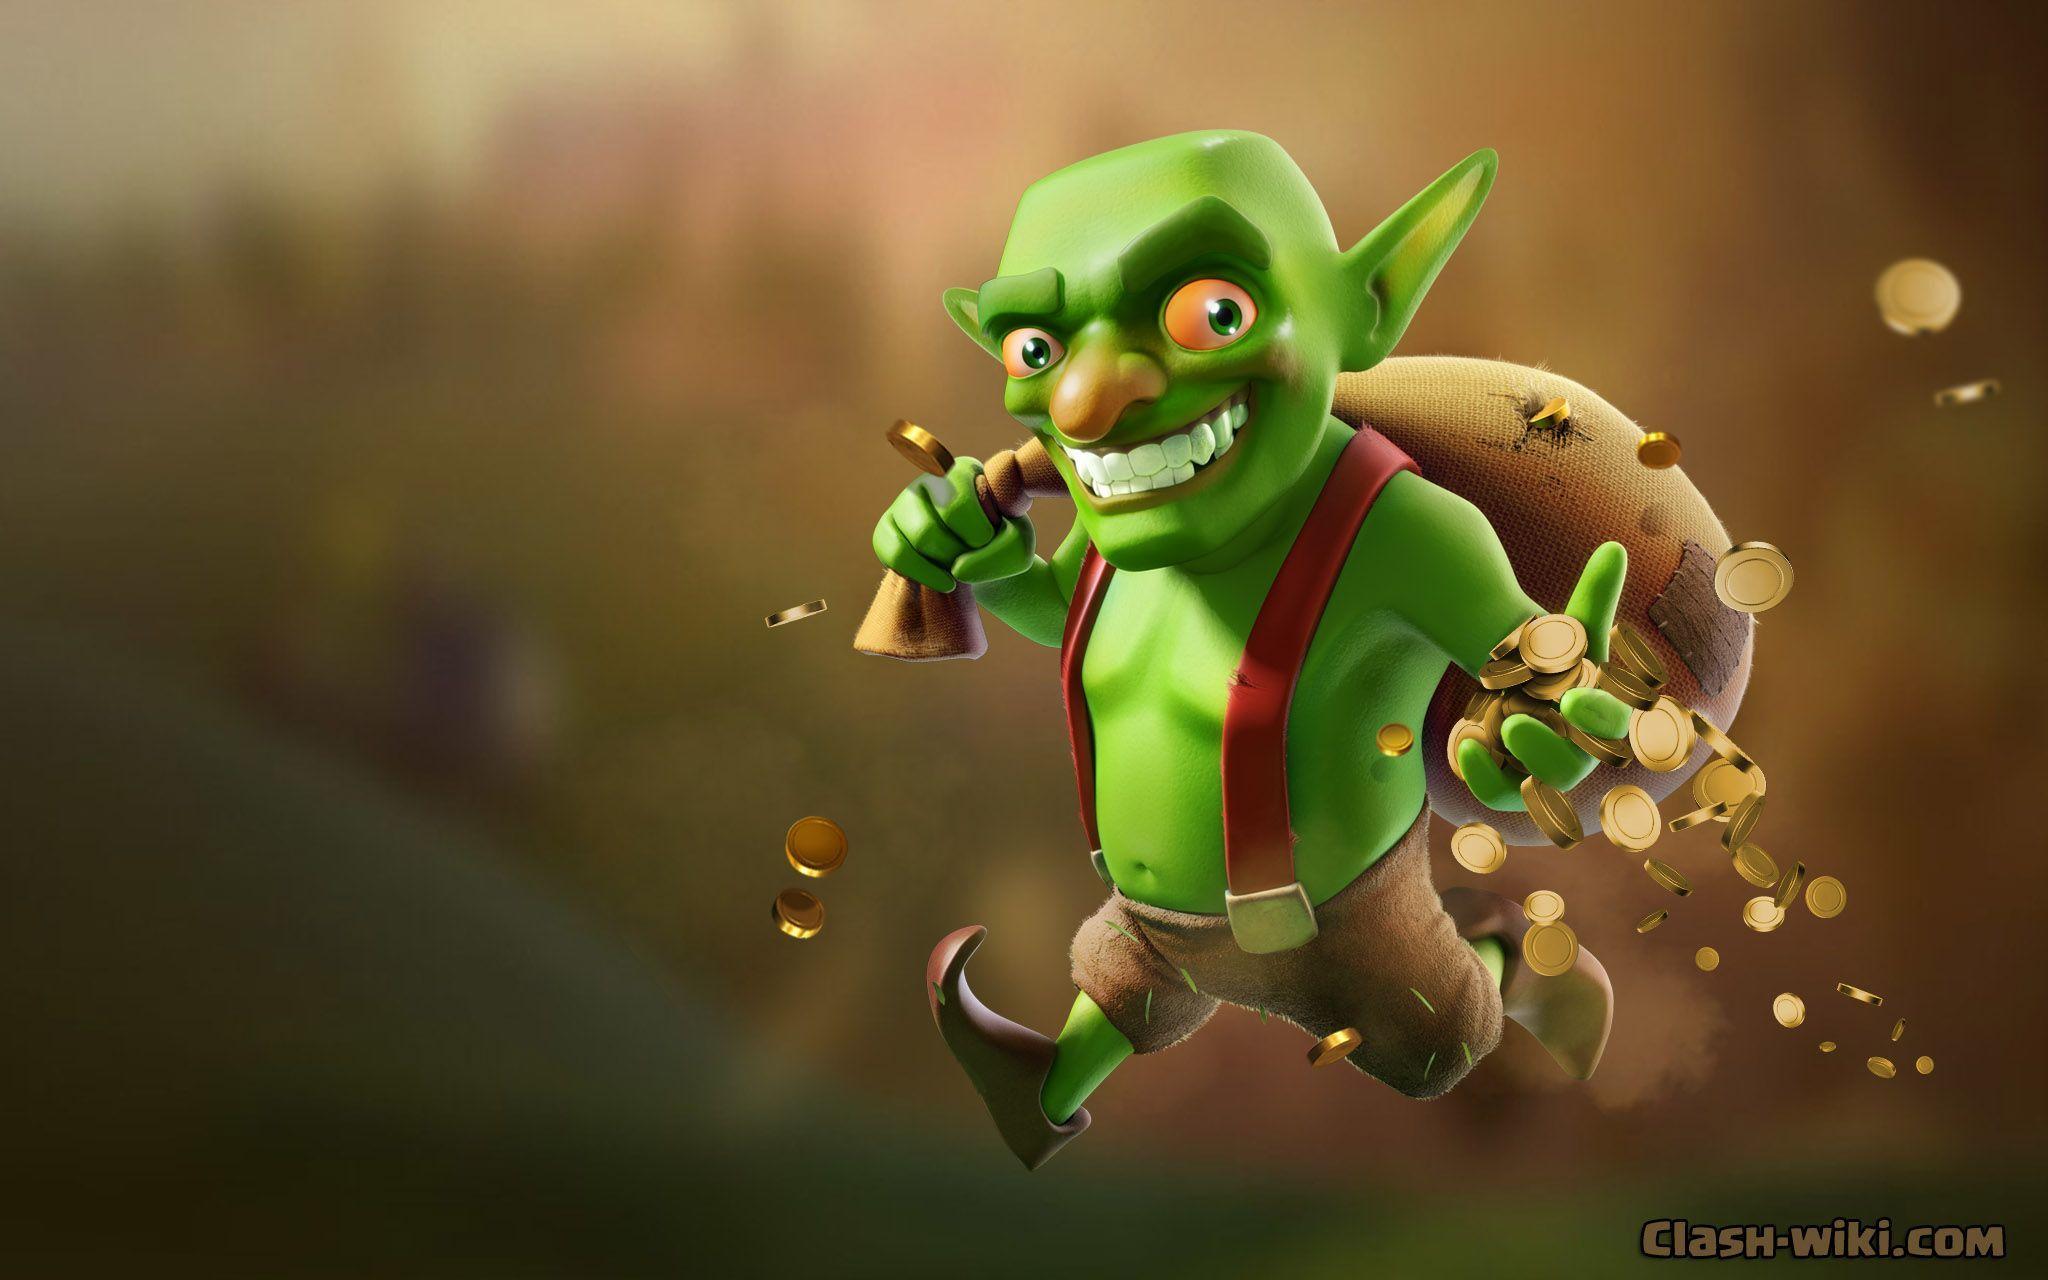 PlayMobo Ads Creativs. Clash of Clans, Wallpaper